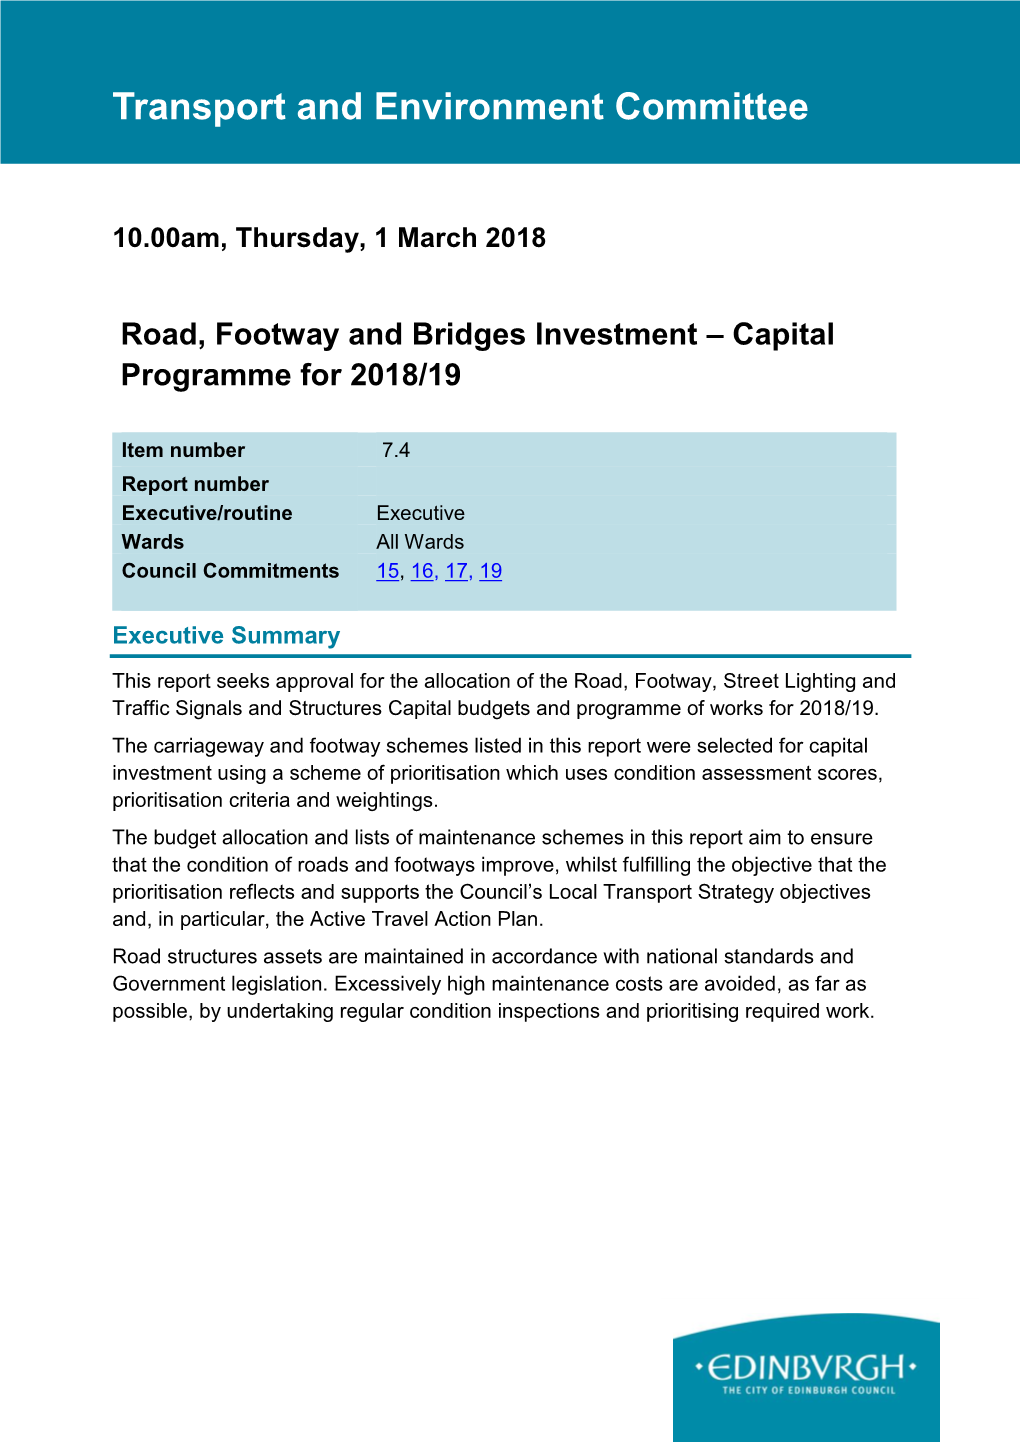 Road Footway and Bridges Investment Capital Programme